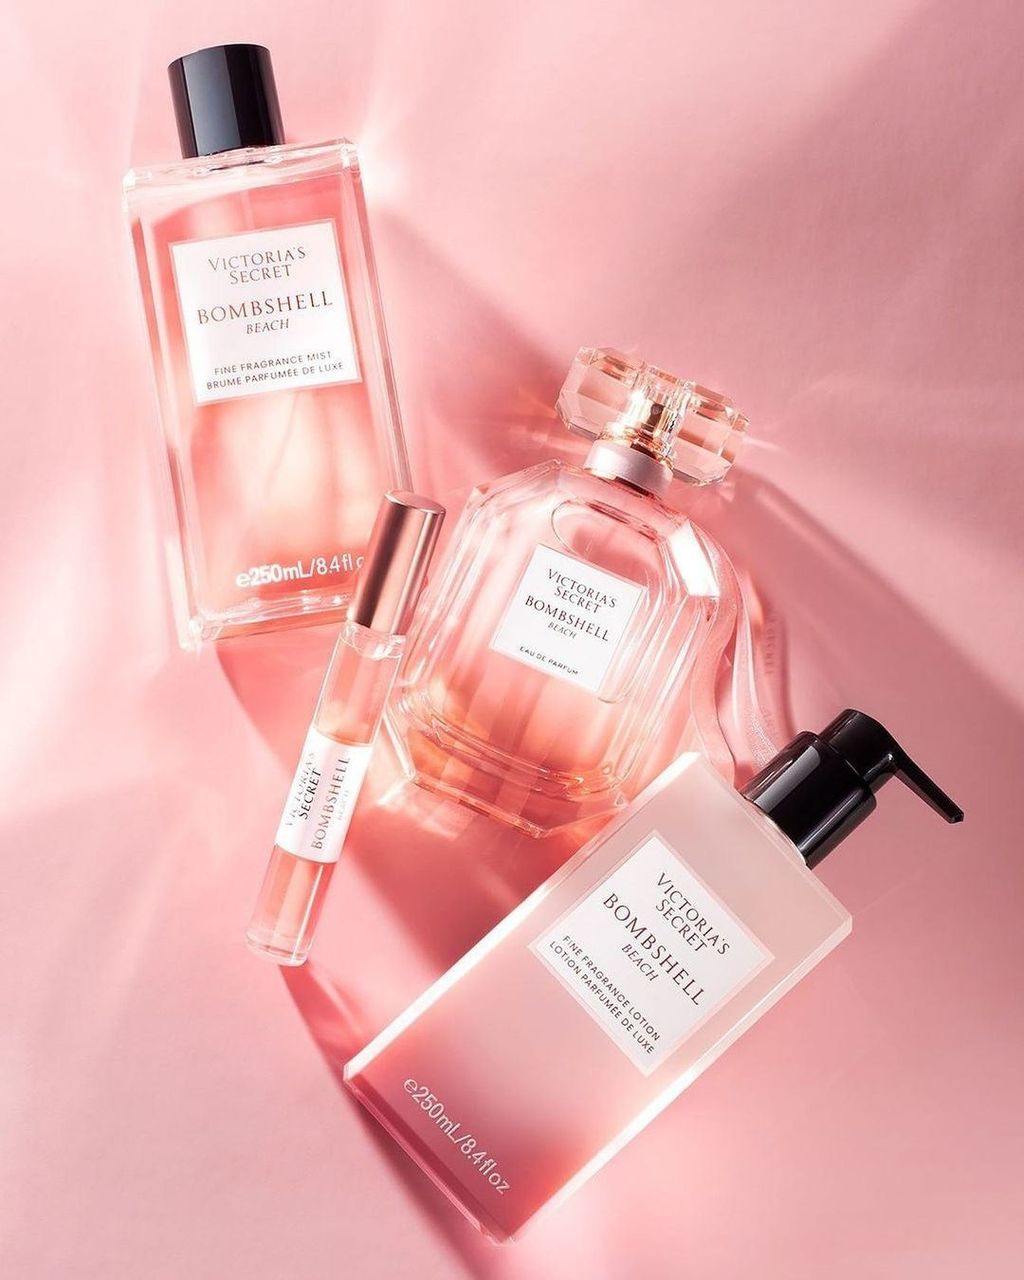 Victoria's Secret Bombshell Beach new fruity floral perfume guide to scents